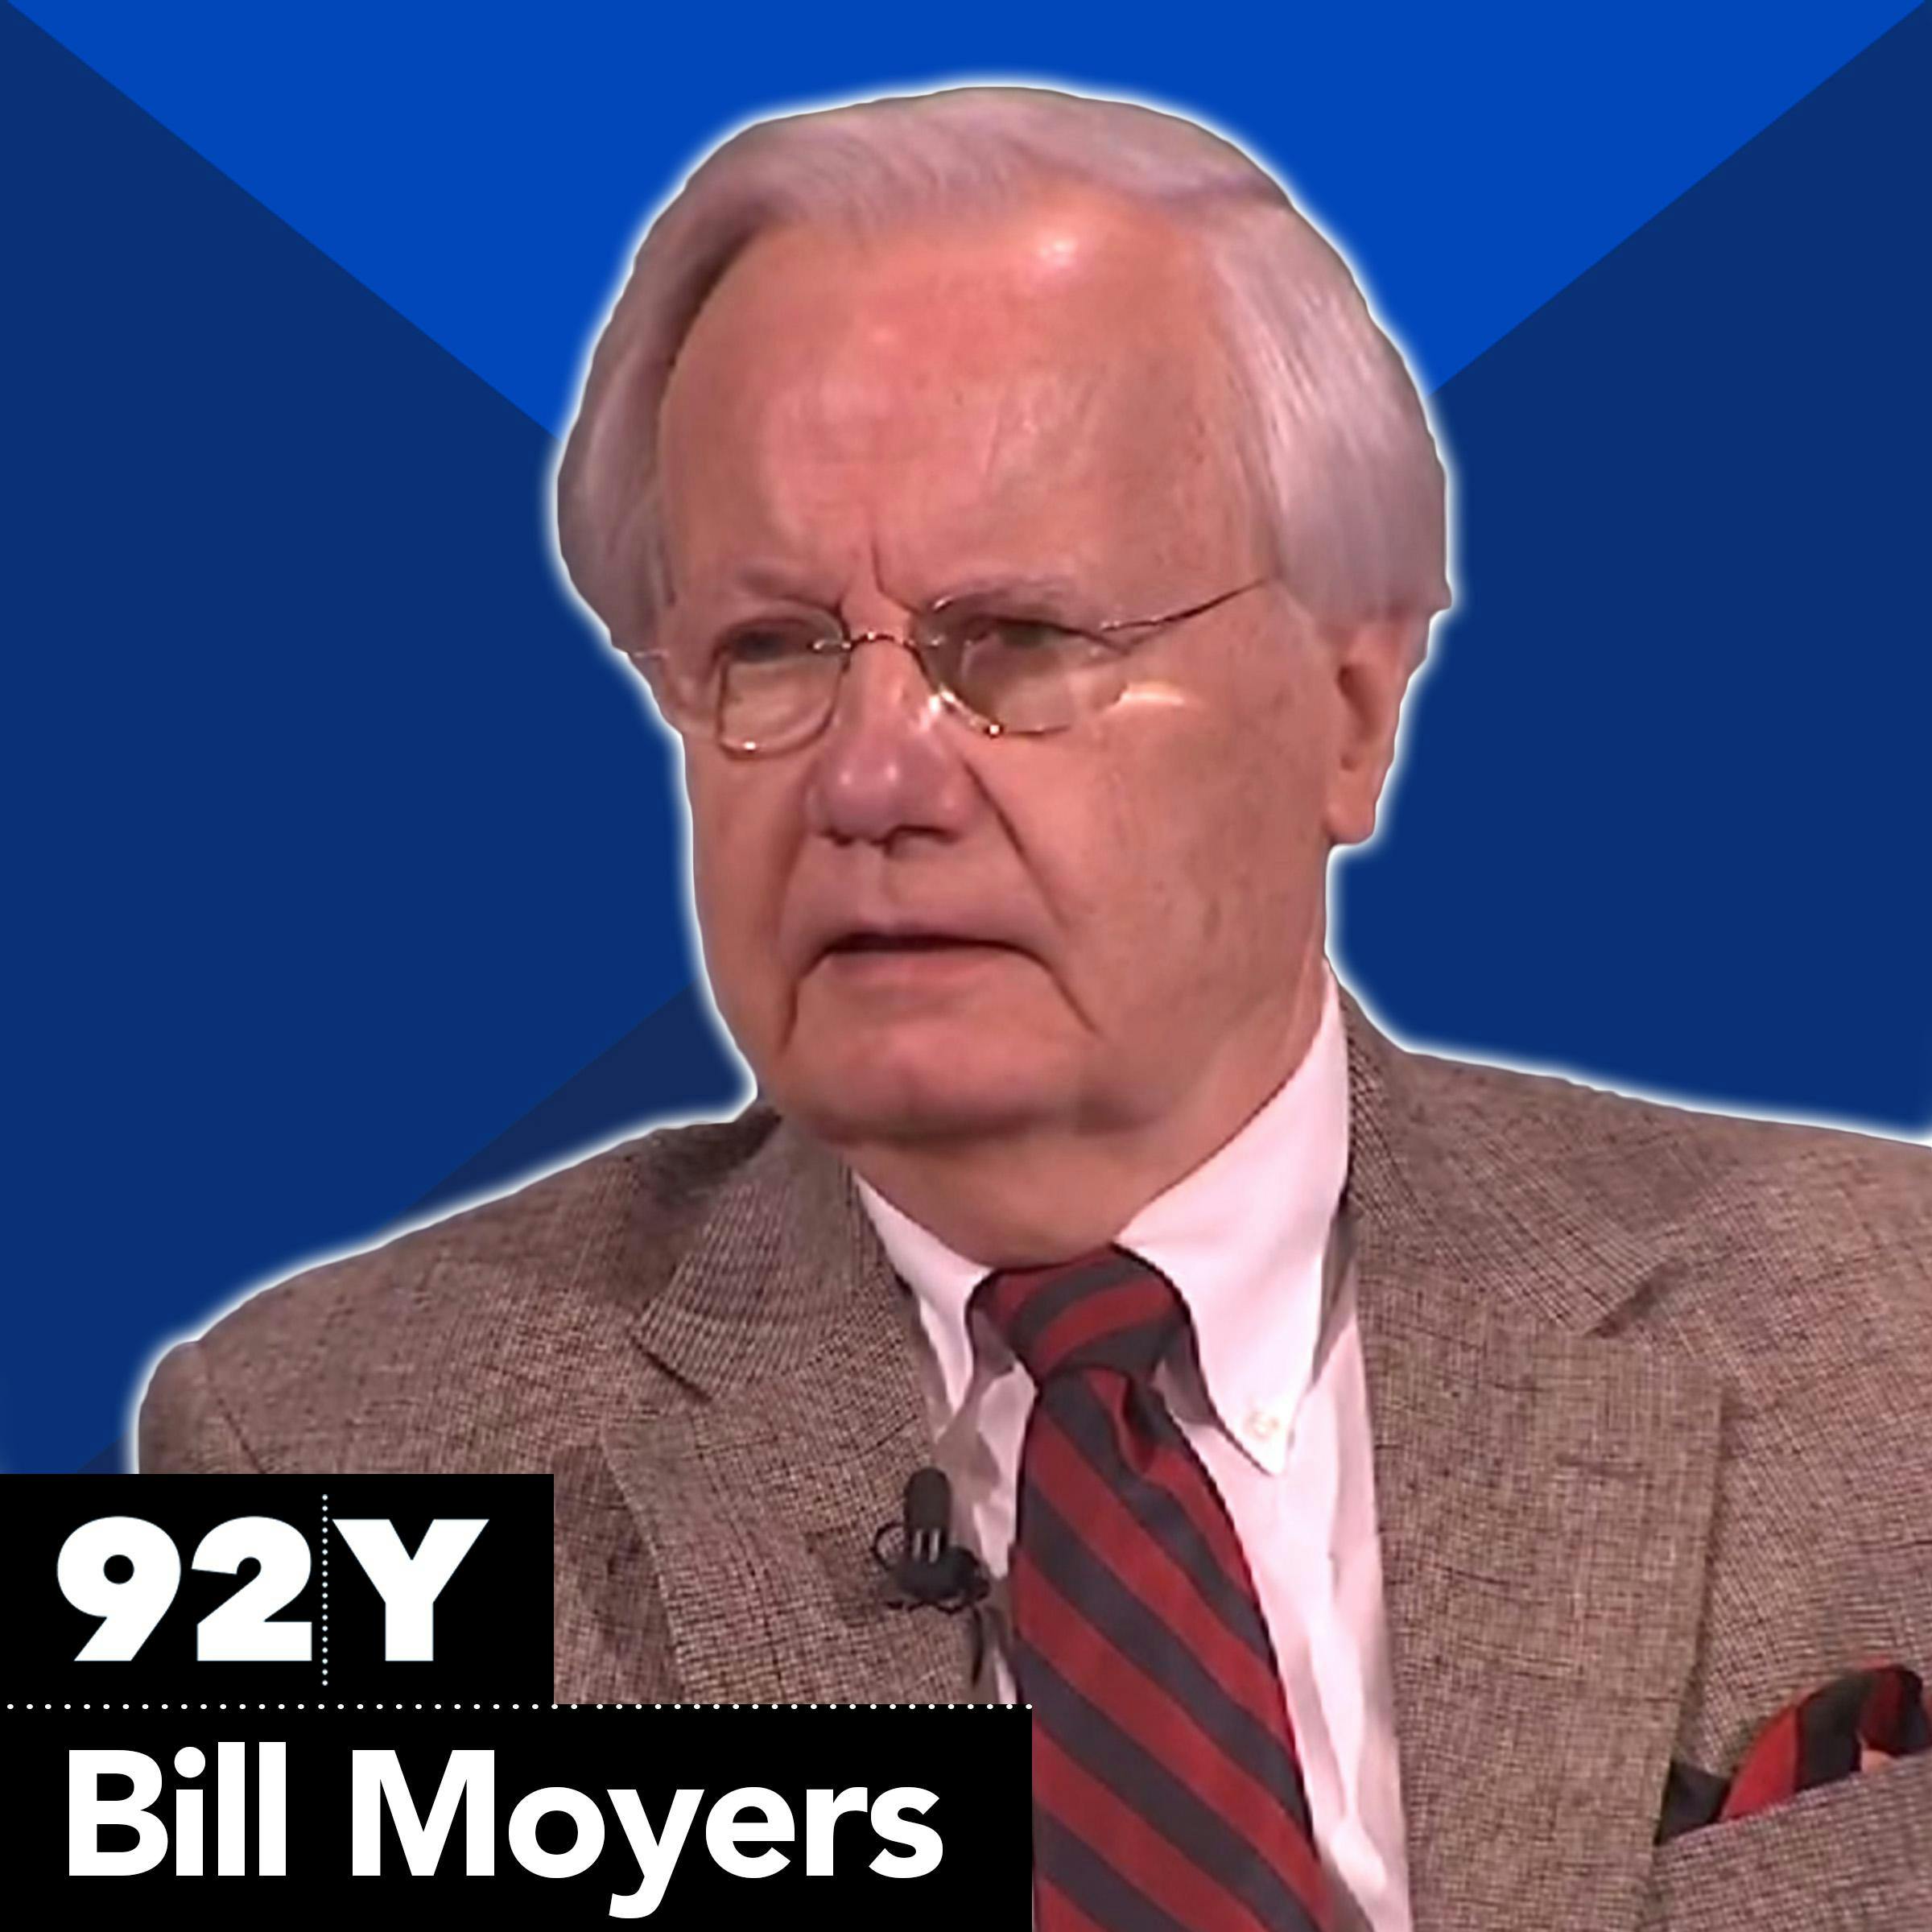 The Conversation Continues - Bill Moyers